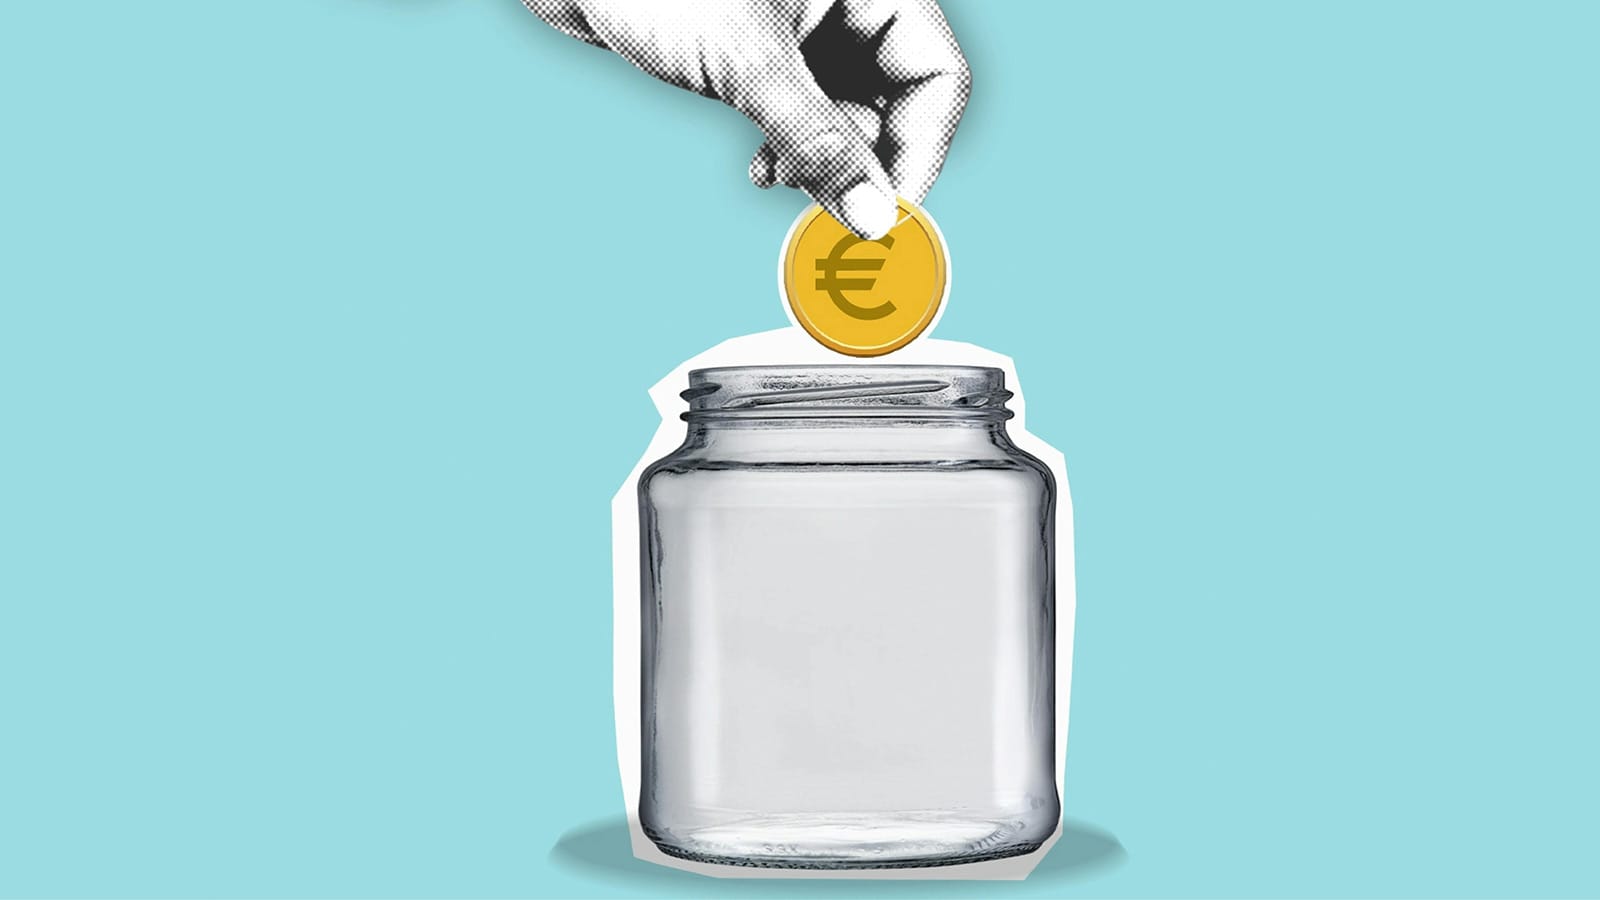 LTV gia eCommerce hand puts a coin in a jar in light blue backround